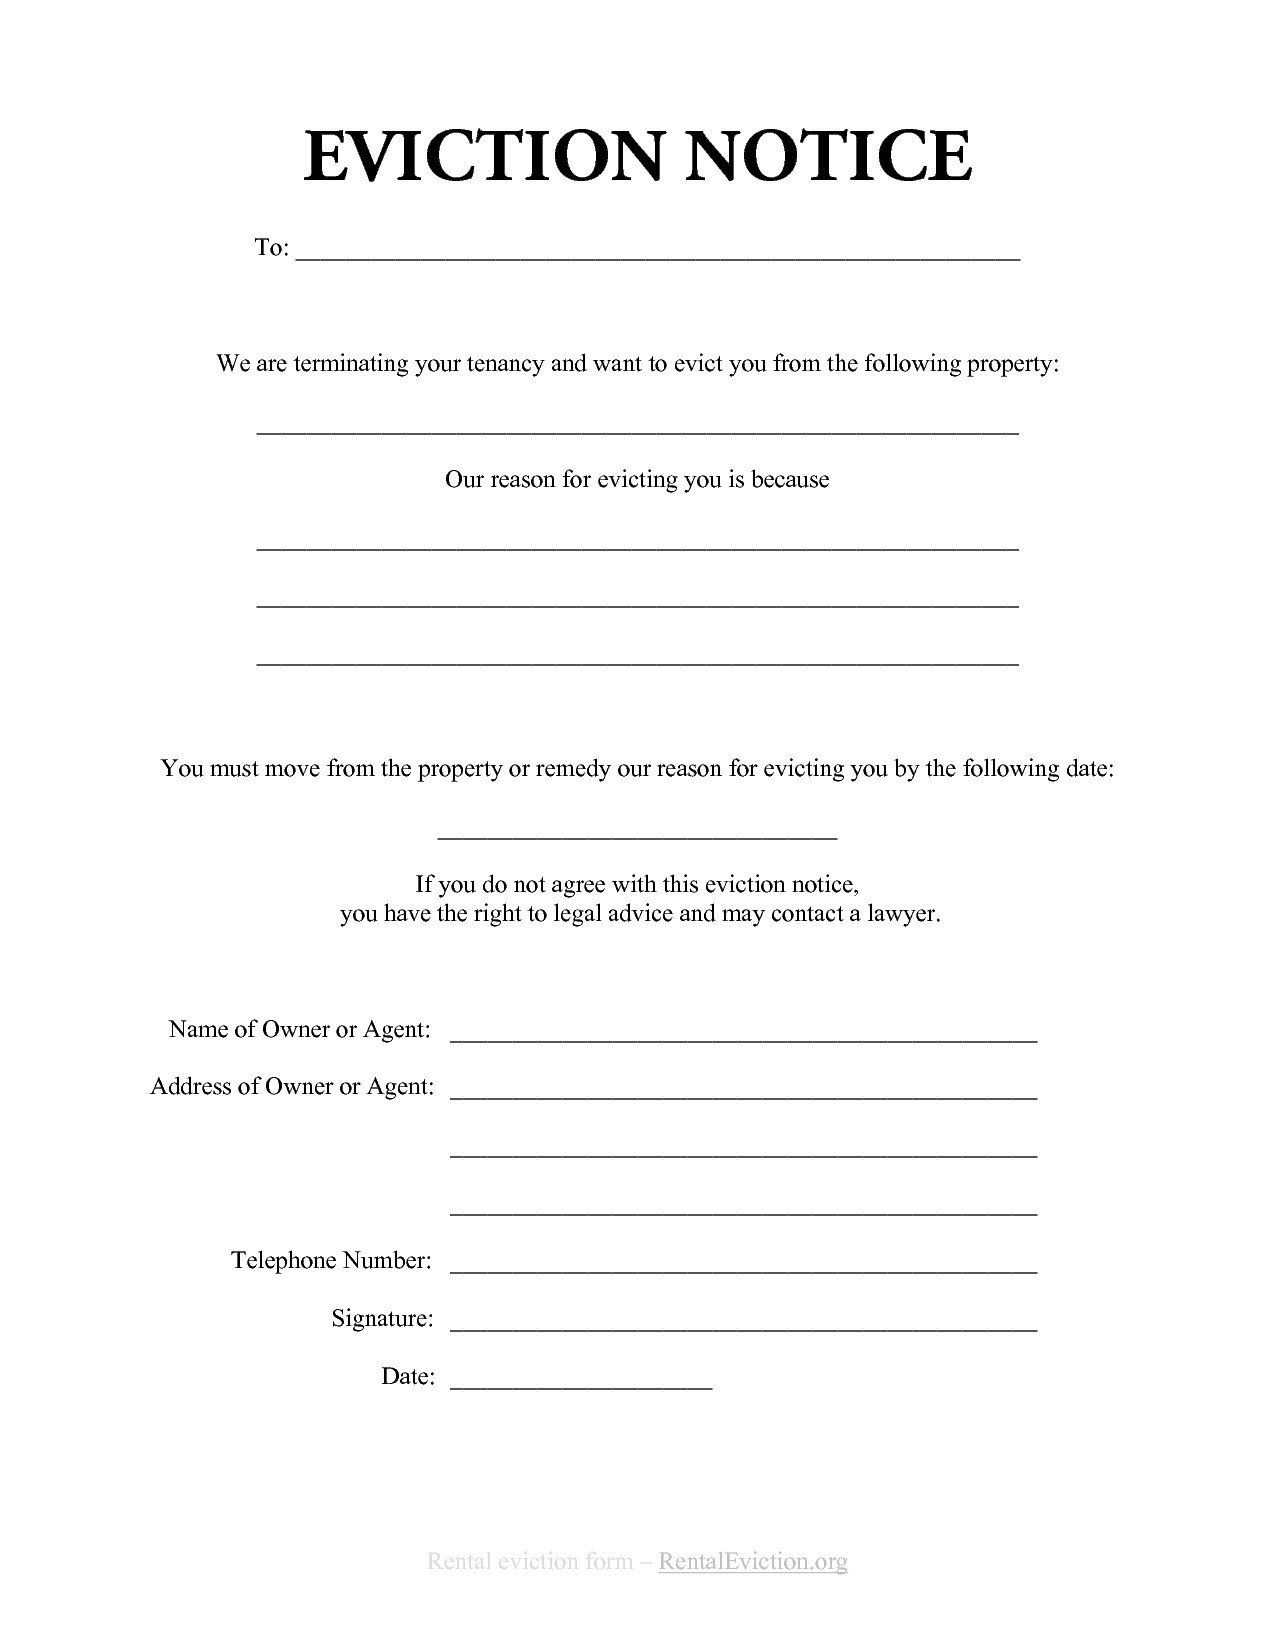 Free Eviction Notice Template Eviction Notice Template